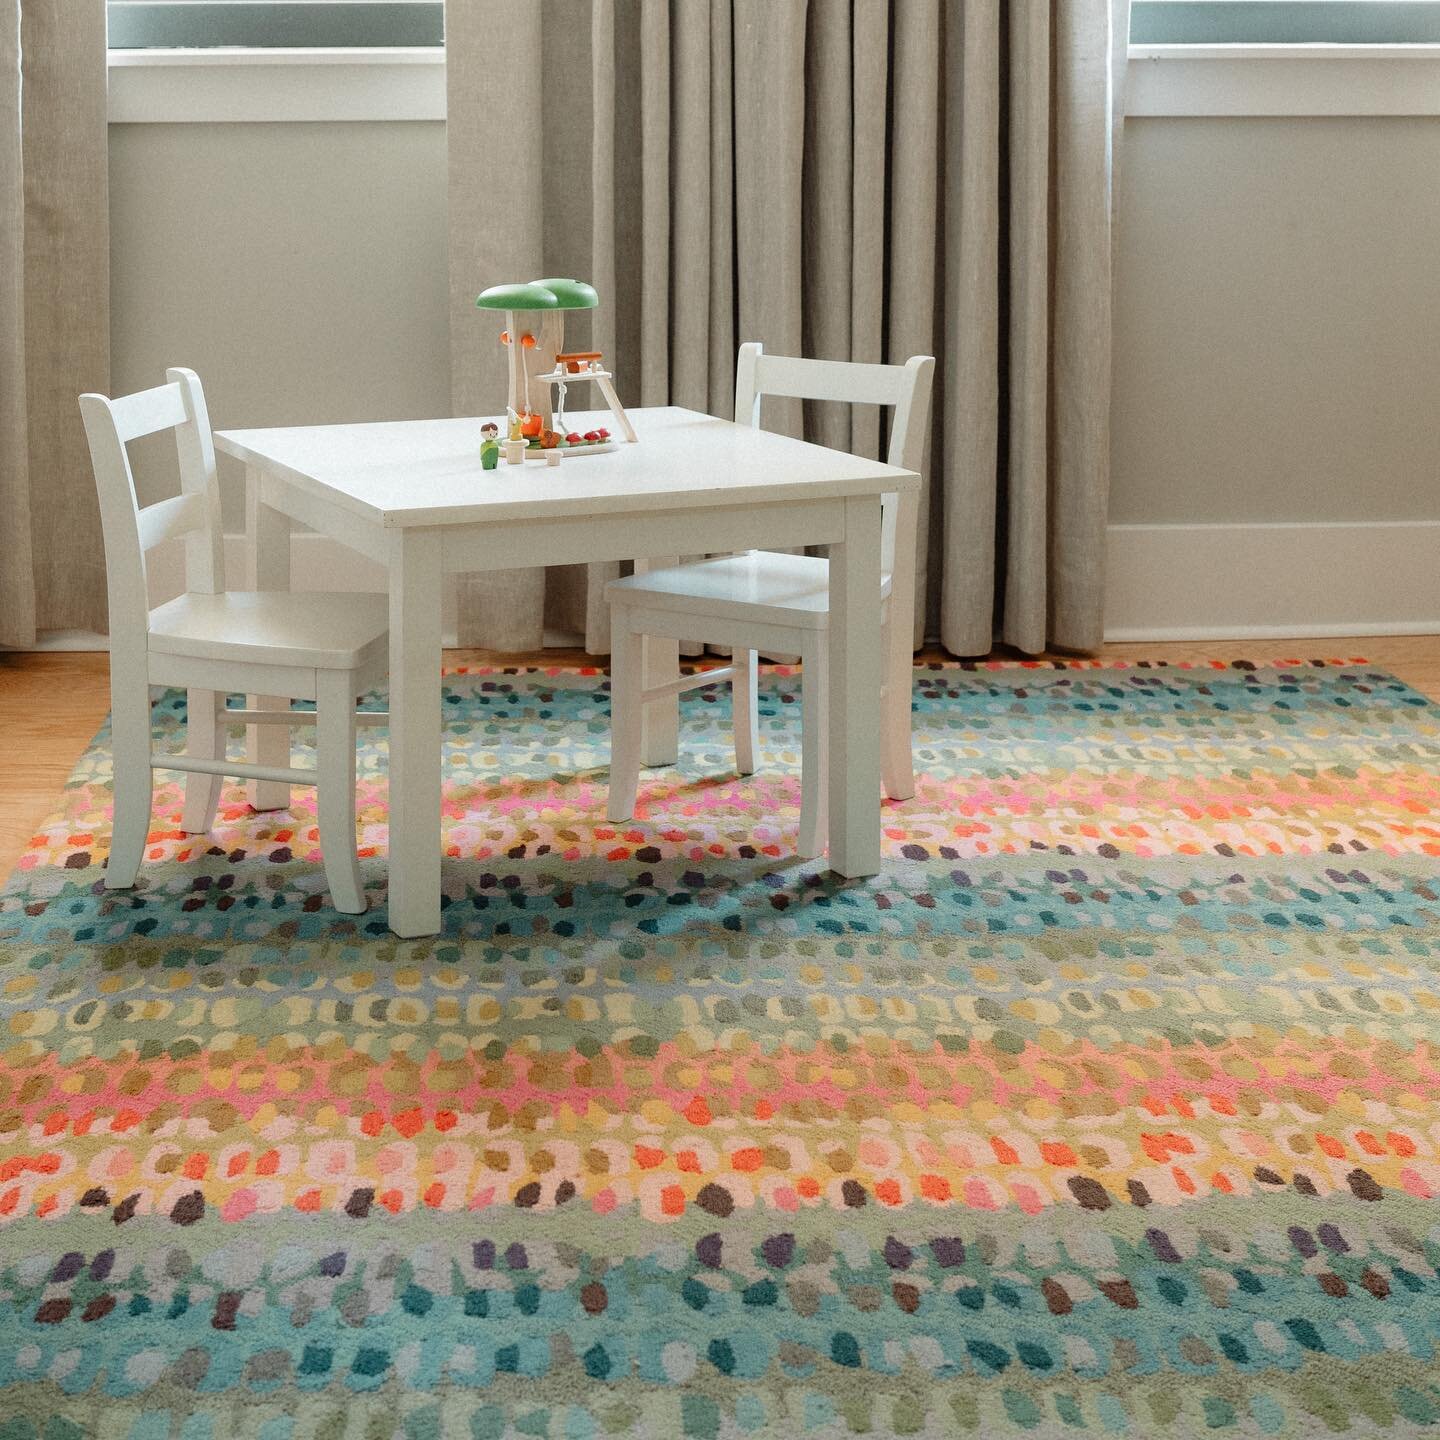 Every nursery should have a cute/cheerful rug, don&rsquo;t you think?!